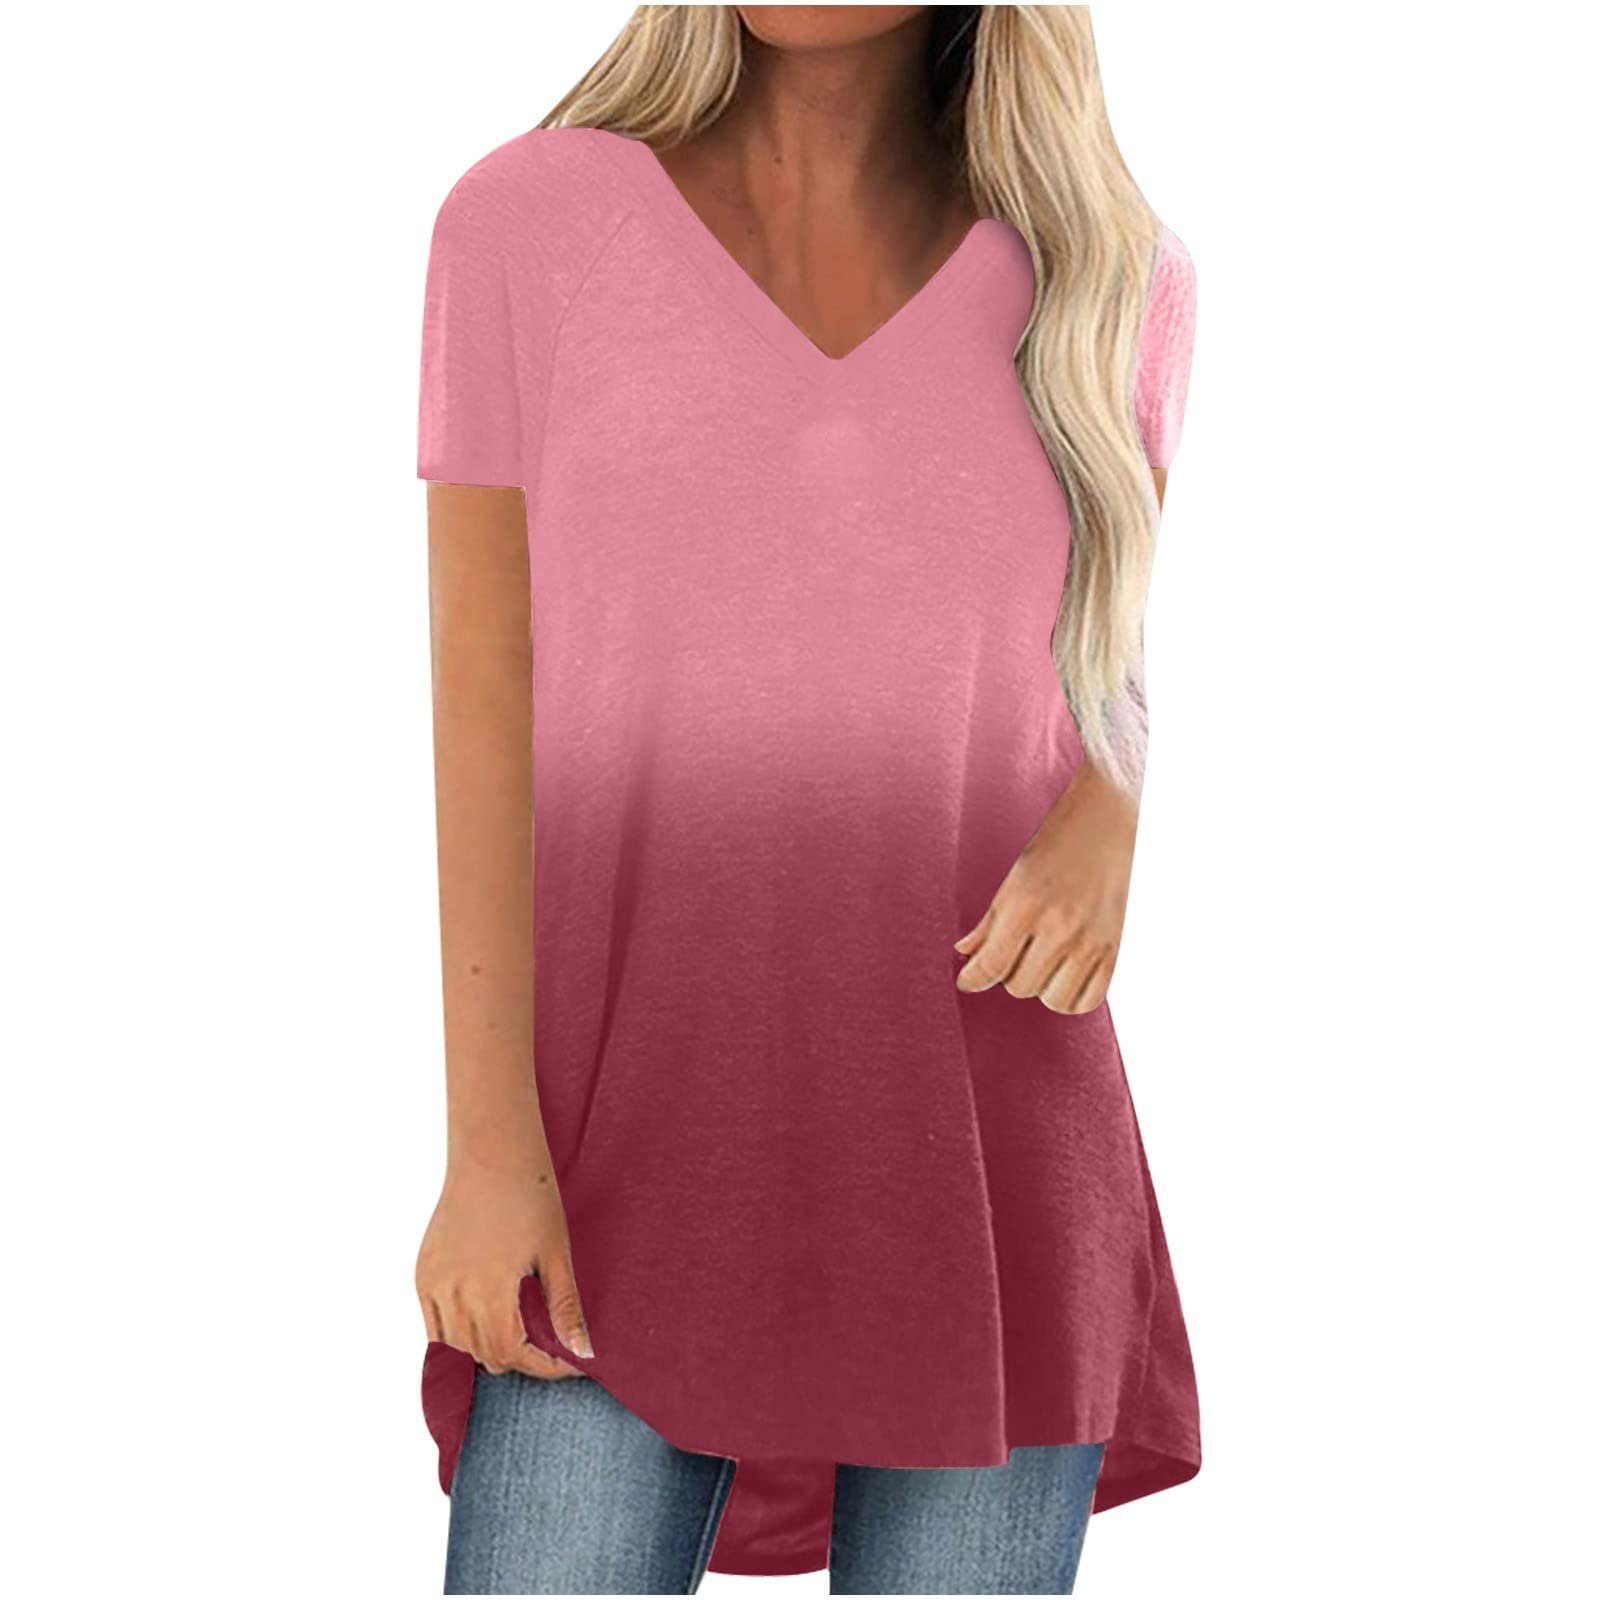 ABABC Women's Tops for Leggings,Dressy Casual Ombre Print V-Neck T Shirts  That Hide Belly